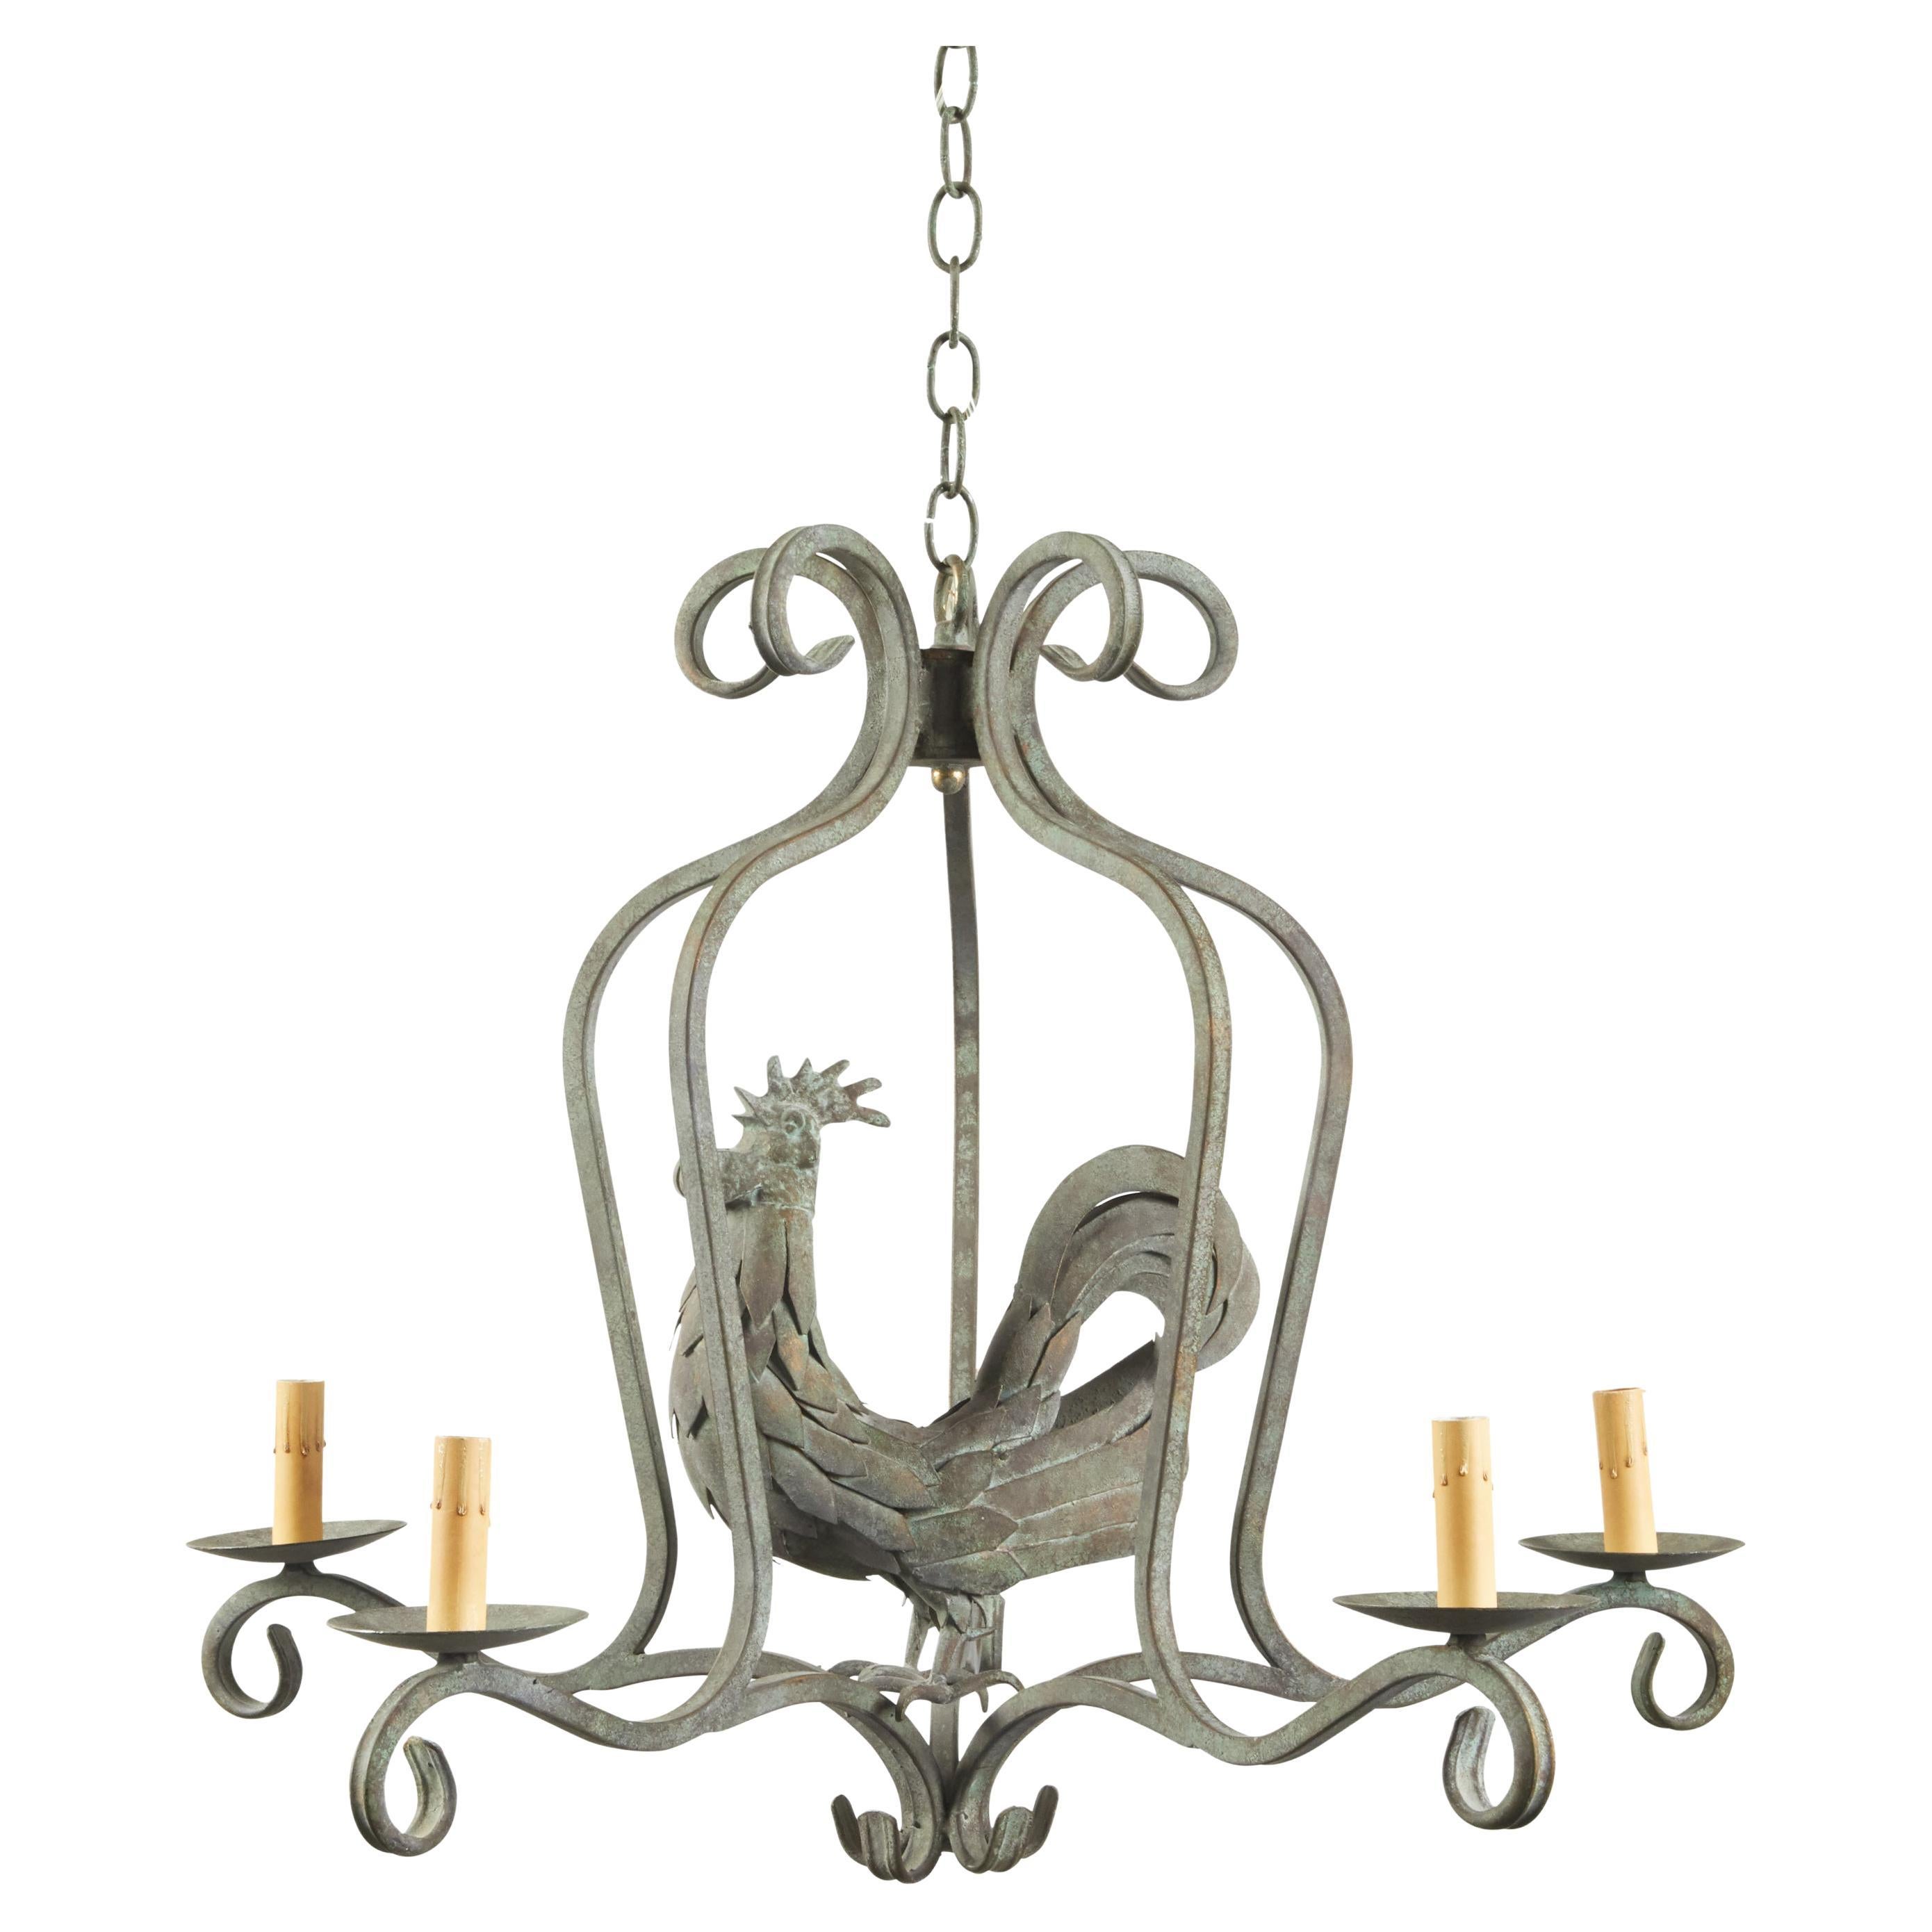 French Midcentury Metal Rooster Five-Light Chandelier with Verdigris Patina For Sale